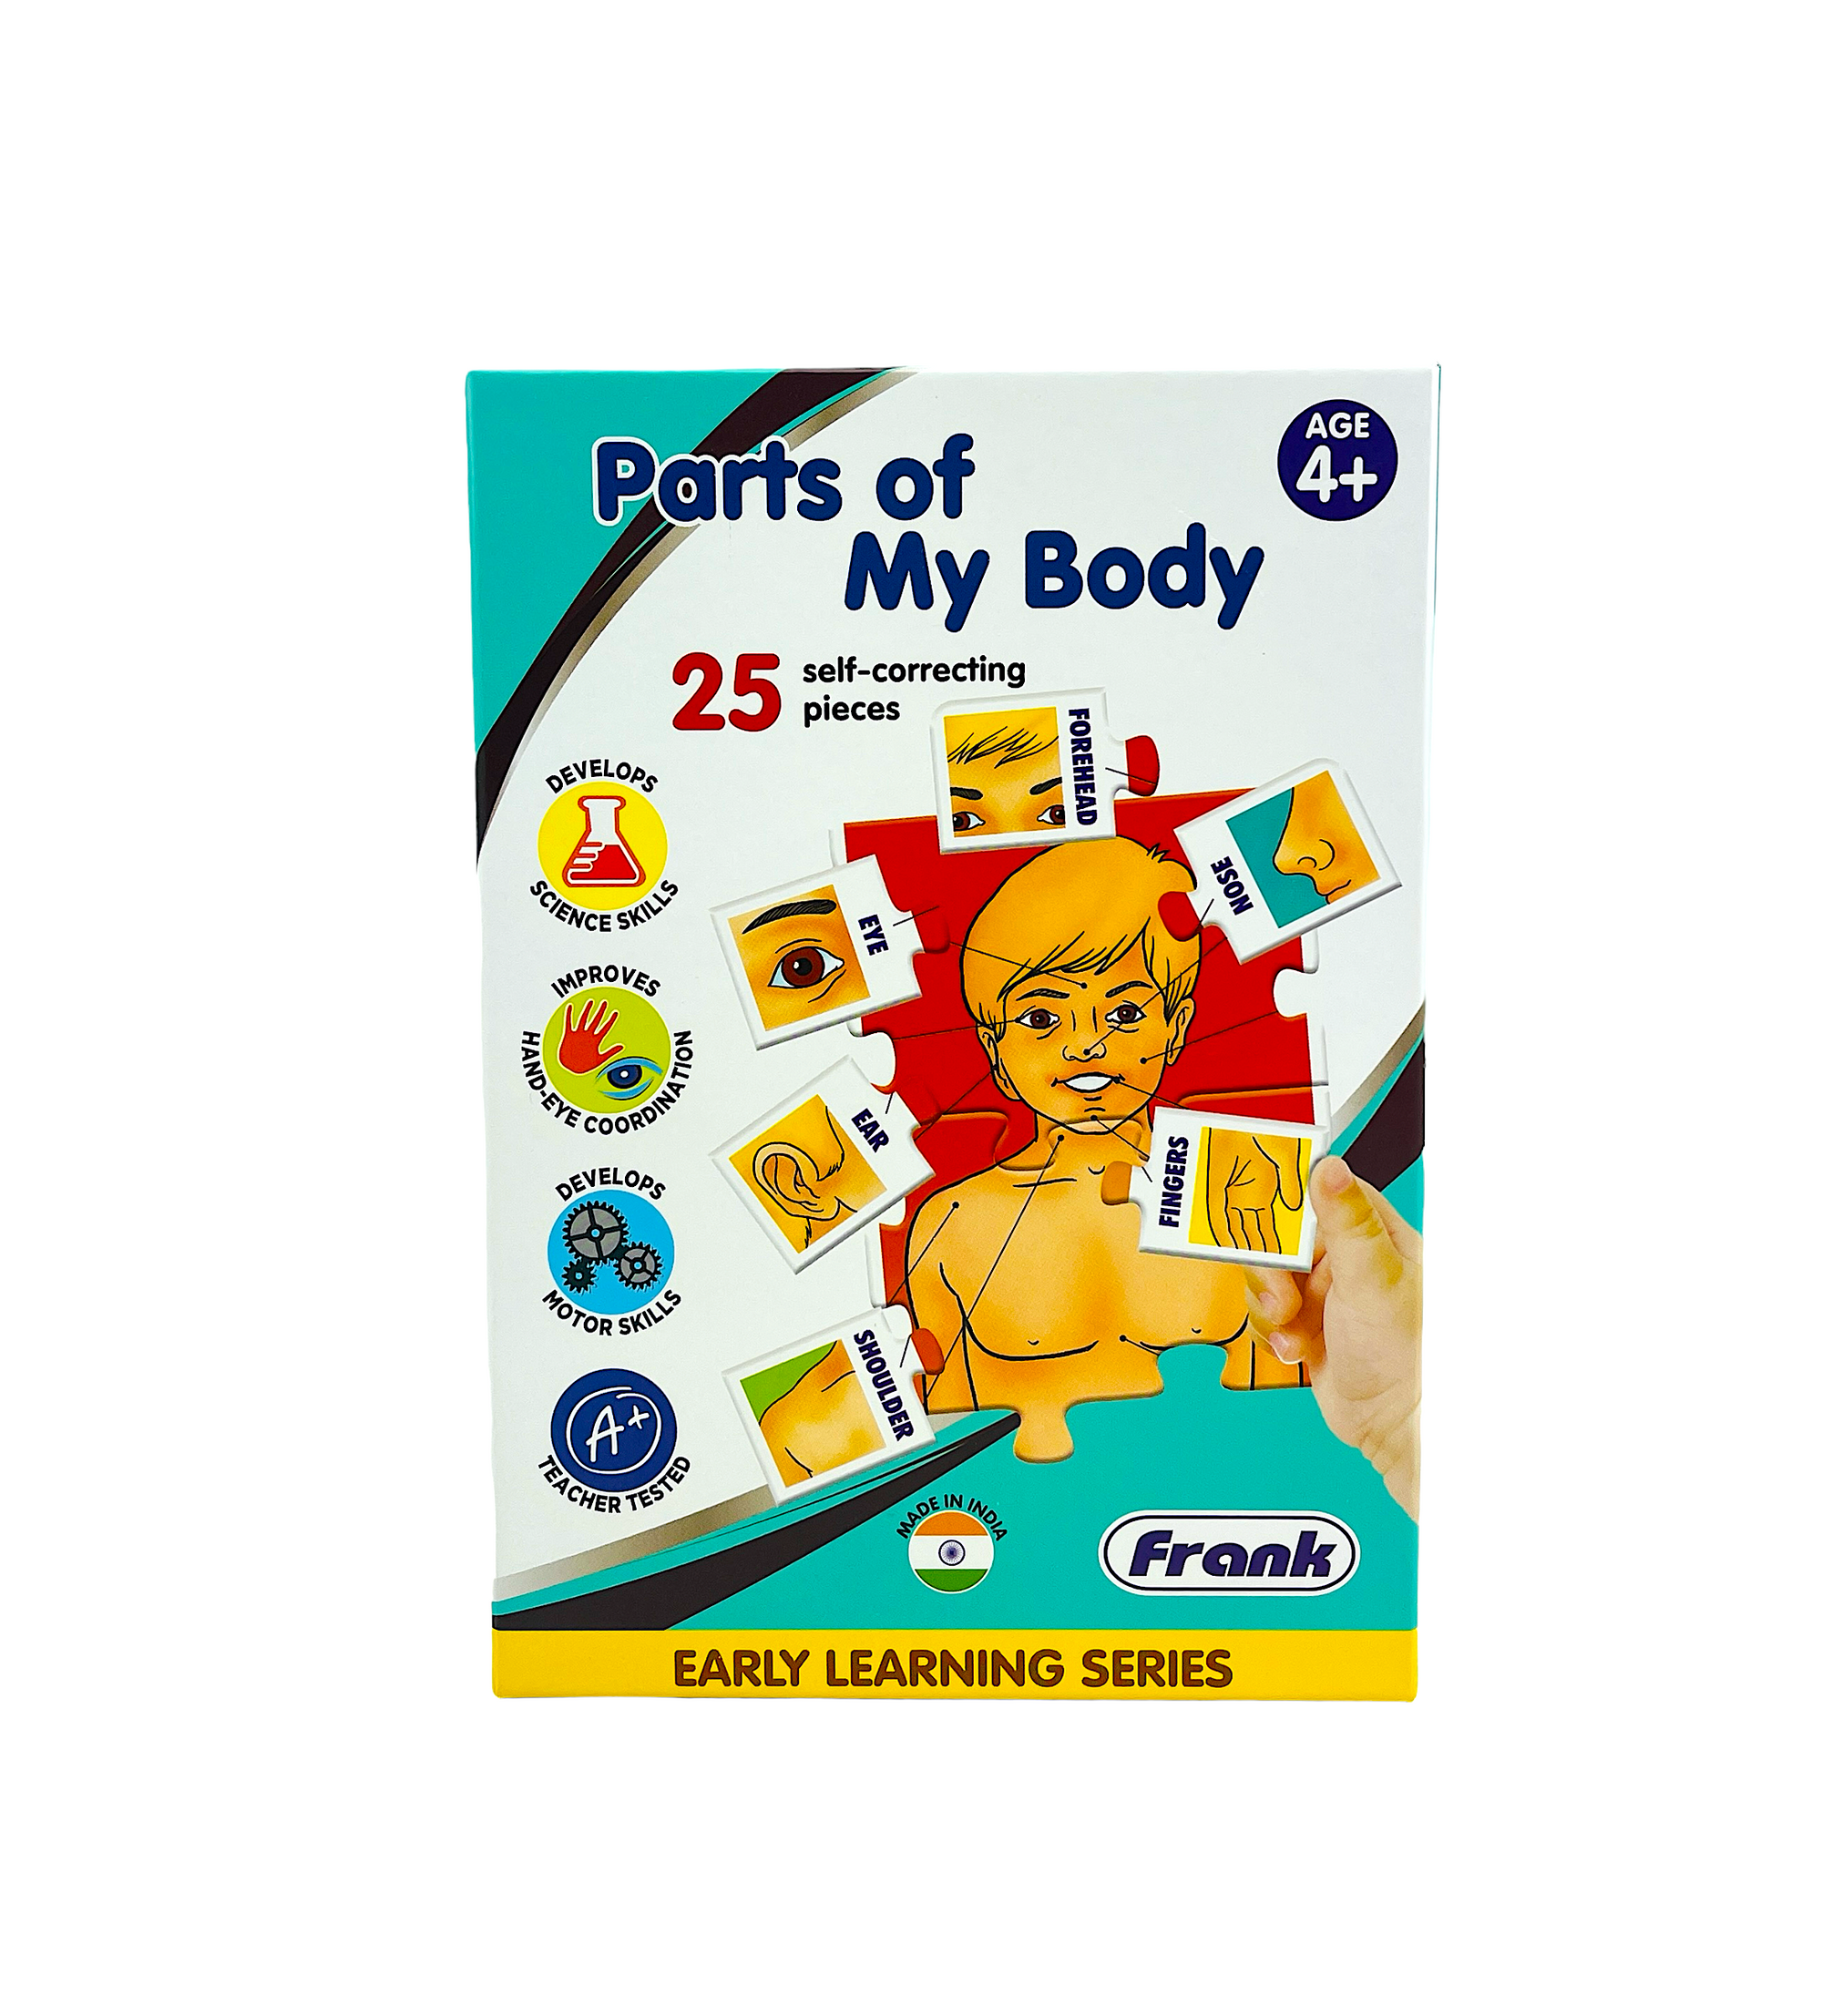 the Frank Early Learning Series - Parts of My Body box on a white background